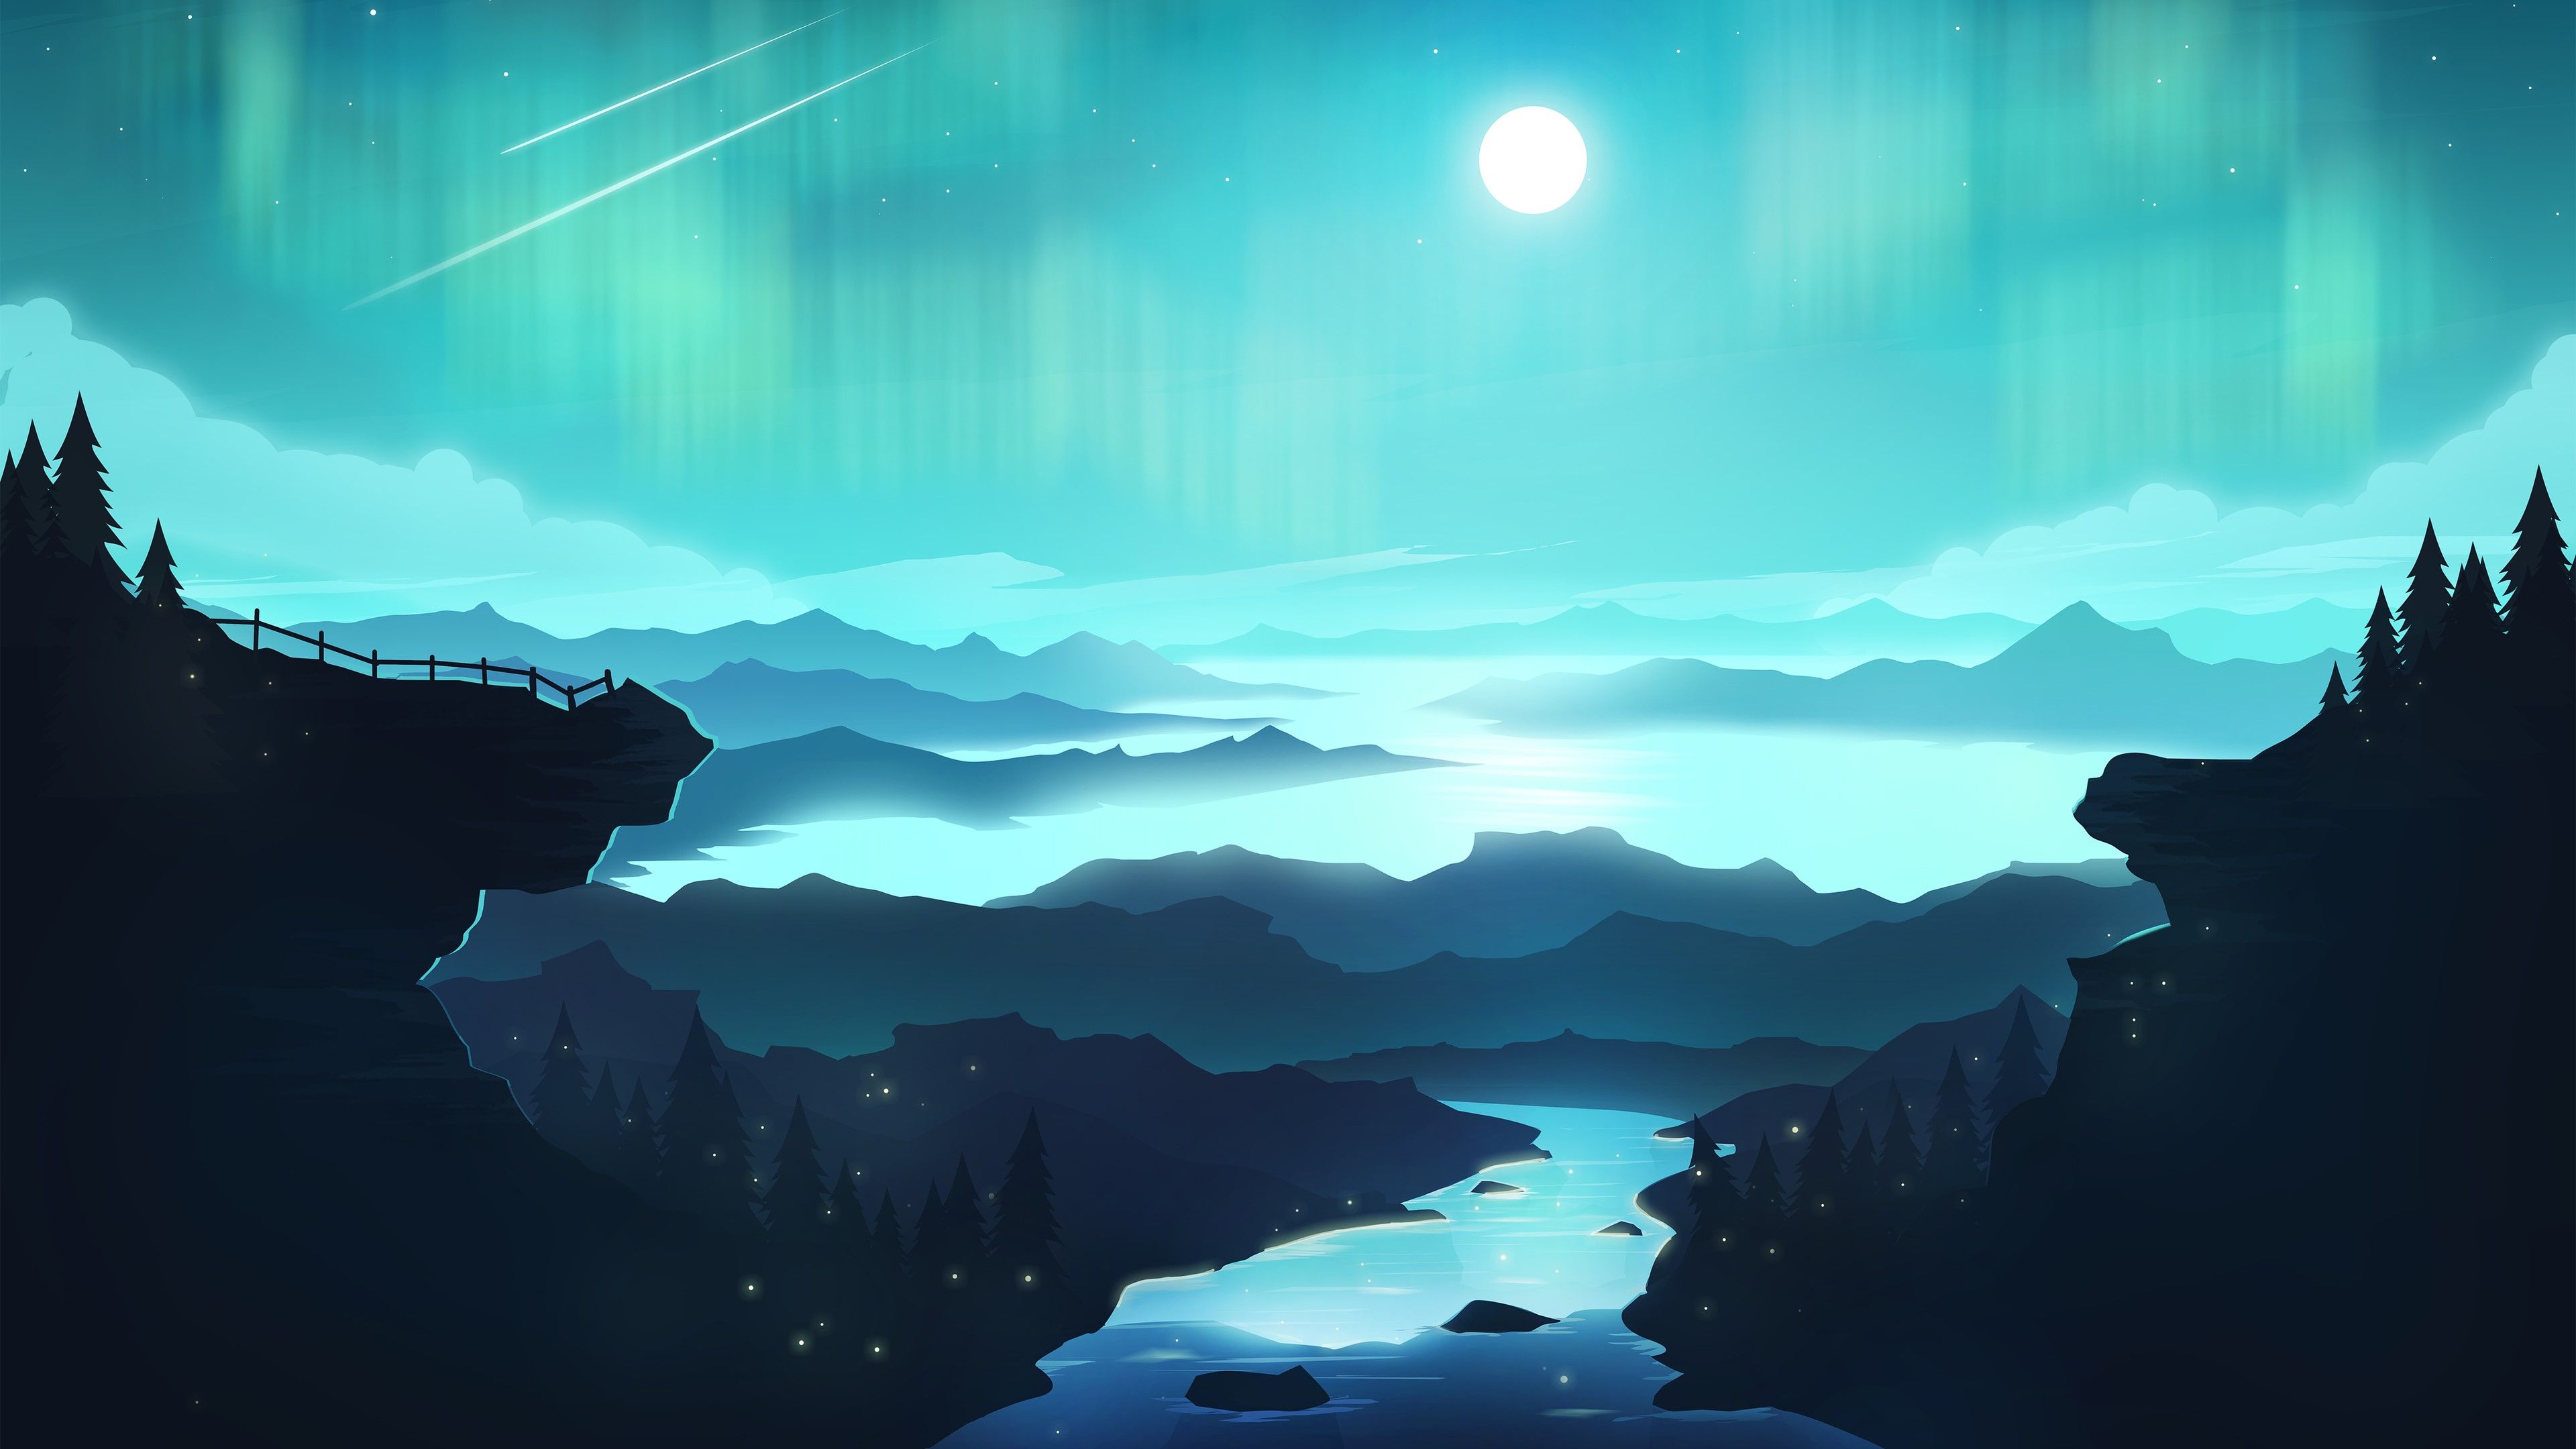 A painting of the night sky with mountains and water - Cyan